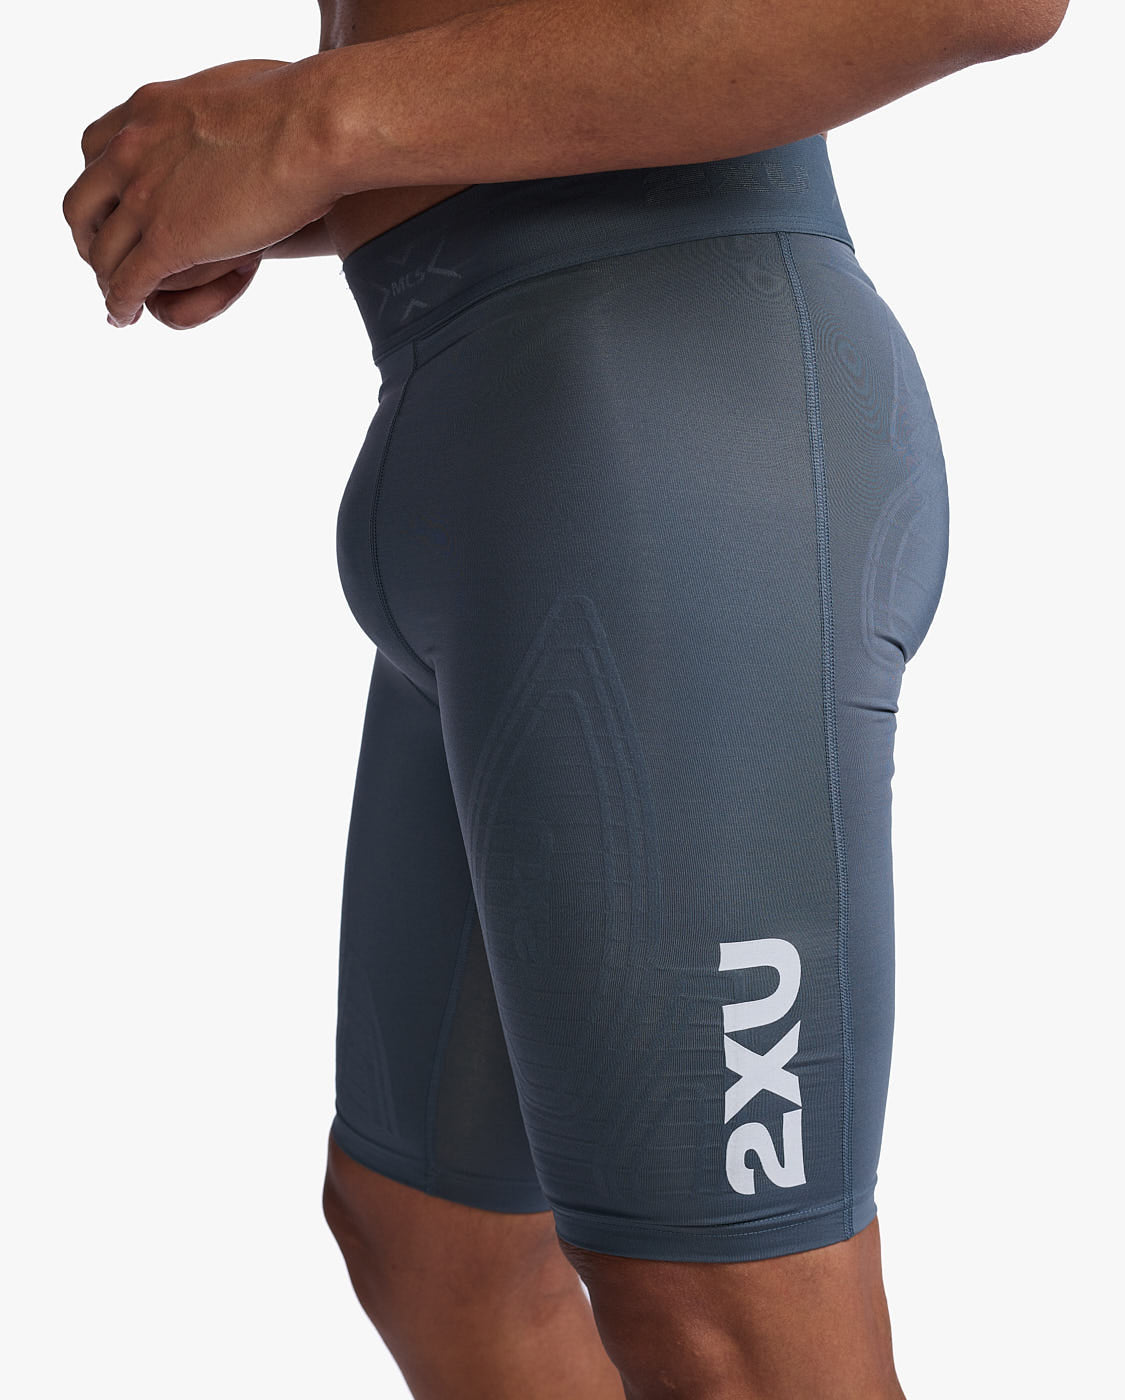 2XU South Africa - Men's Force Compression Shorts - Turbulence/Harbor Mist - Turbulence/Harbor Mist